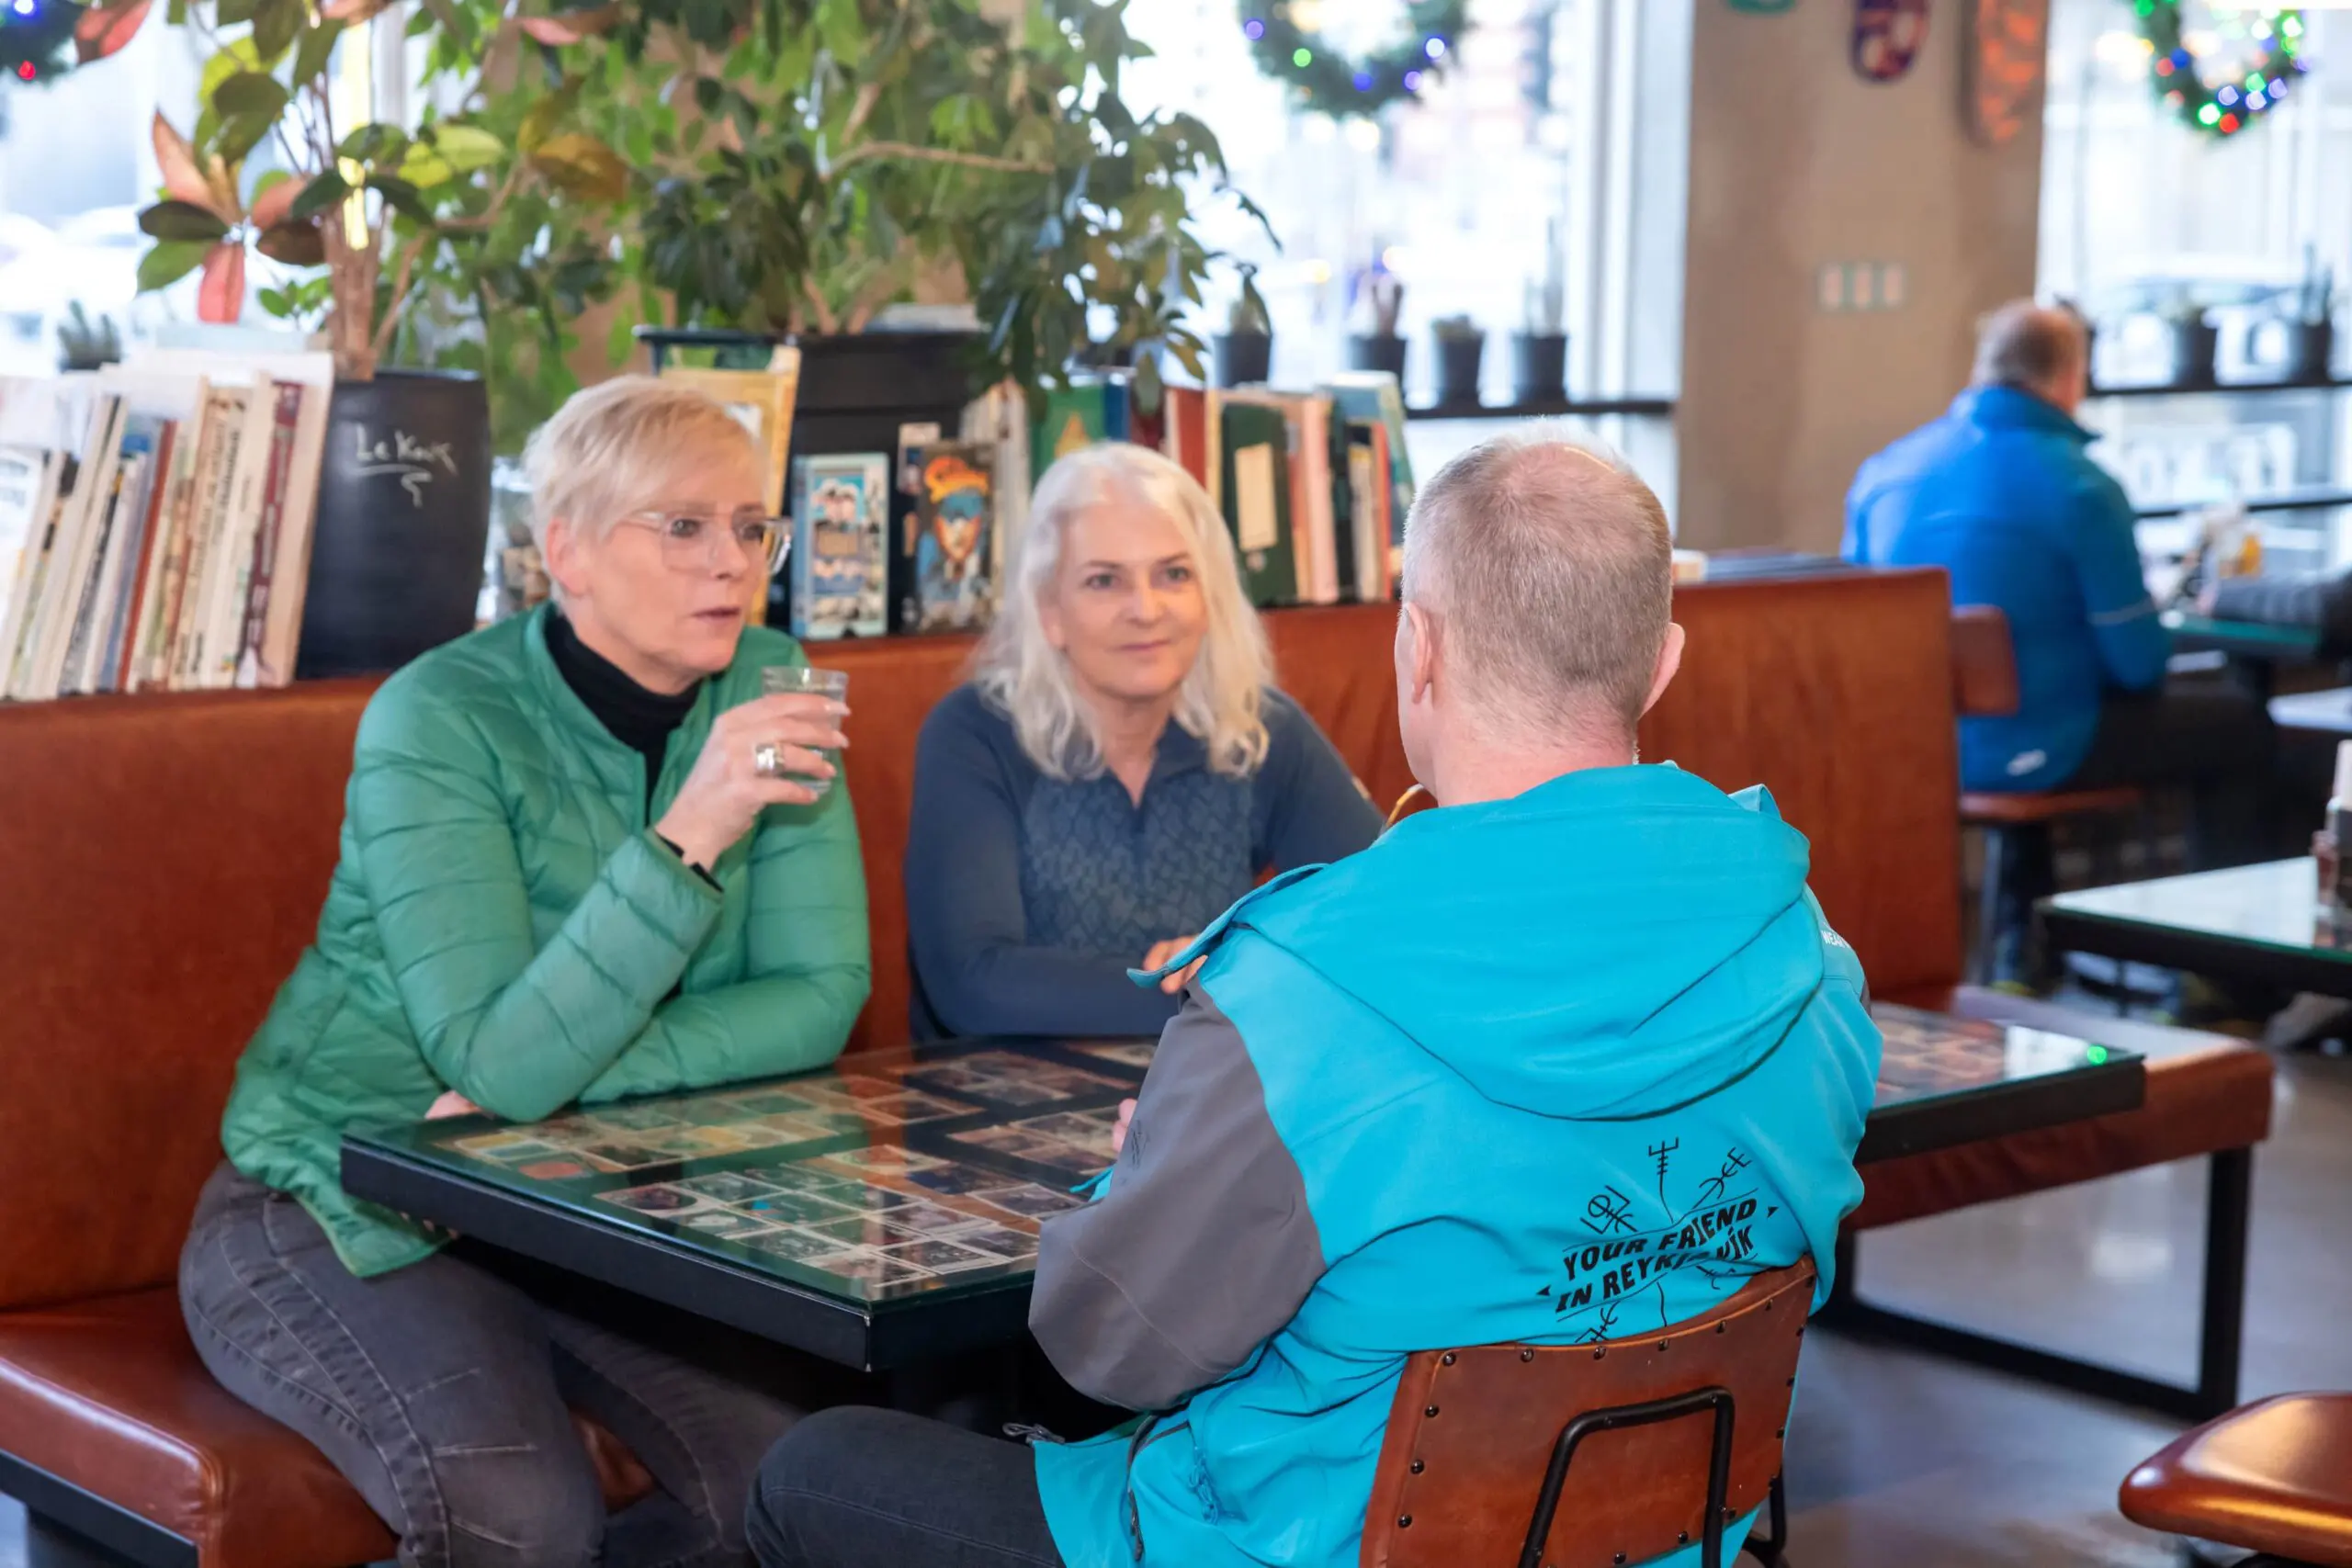 The Host of Reykjavik Meet & Greet can meet you at a coffee house or restaurant